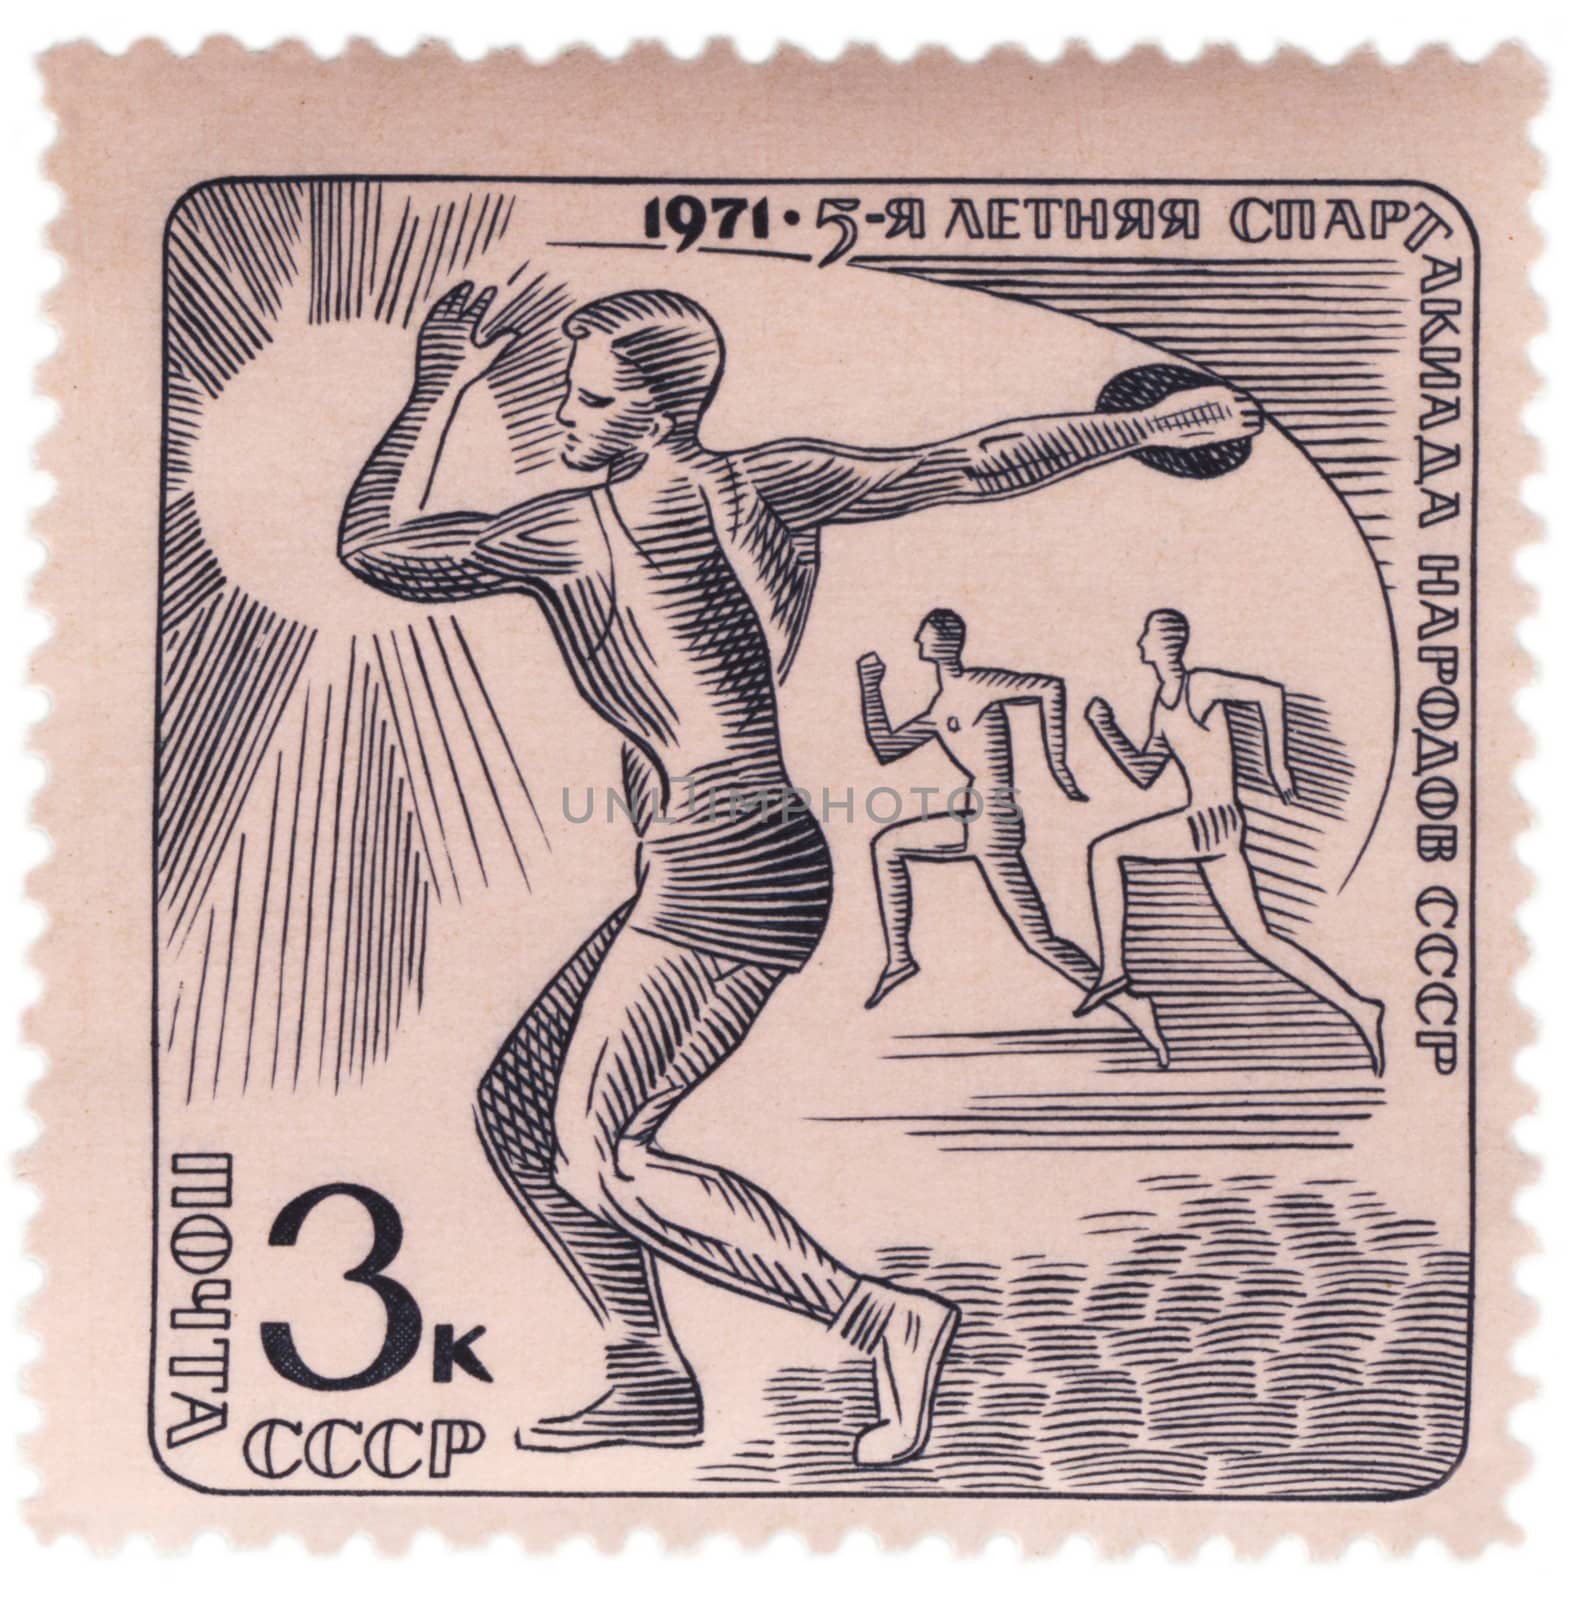 USSR - CIRCA 1971: A stamp printed in USSR shows track and field athletics, series, circa 1971